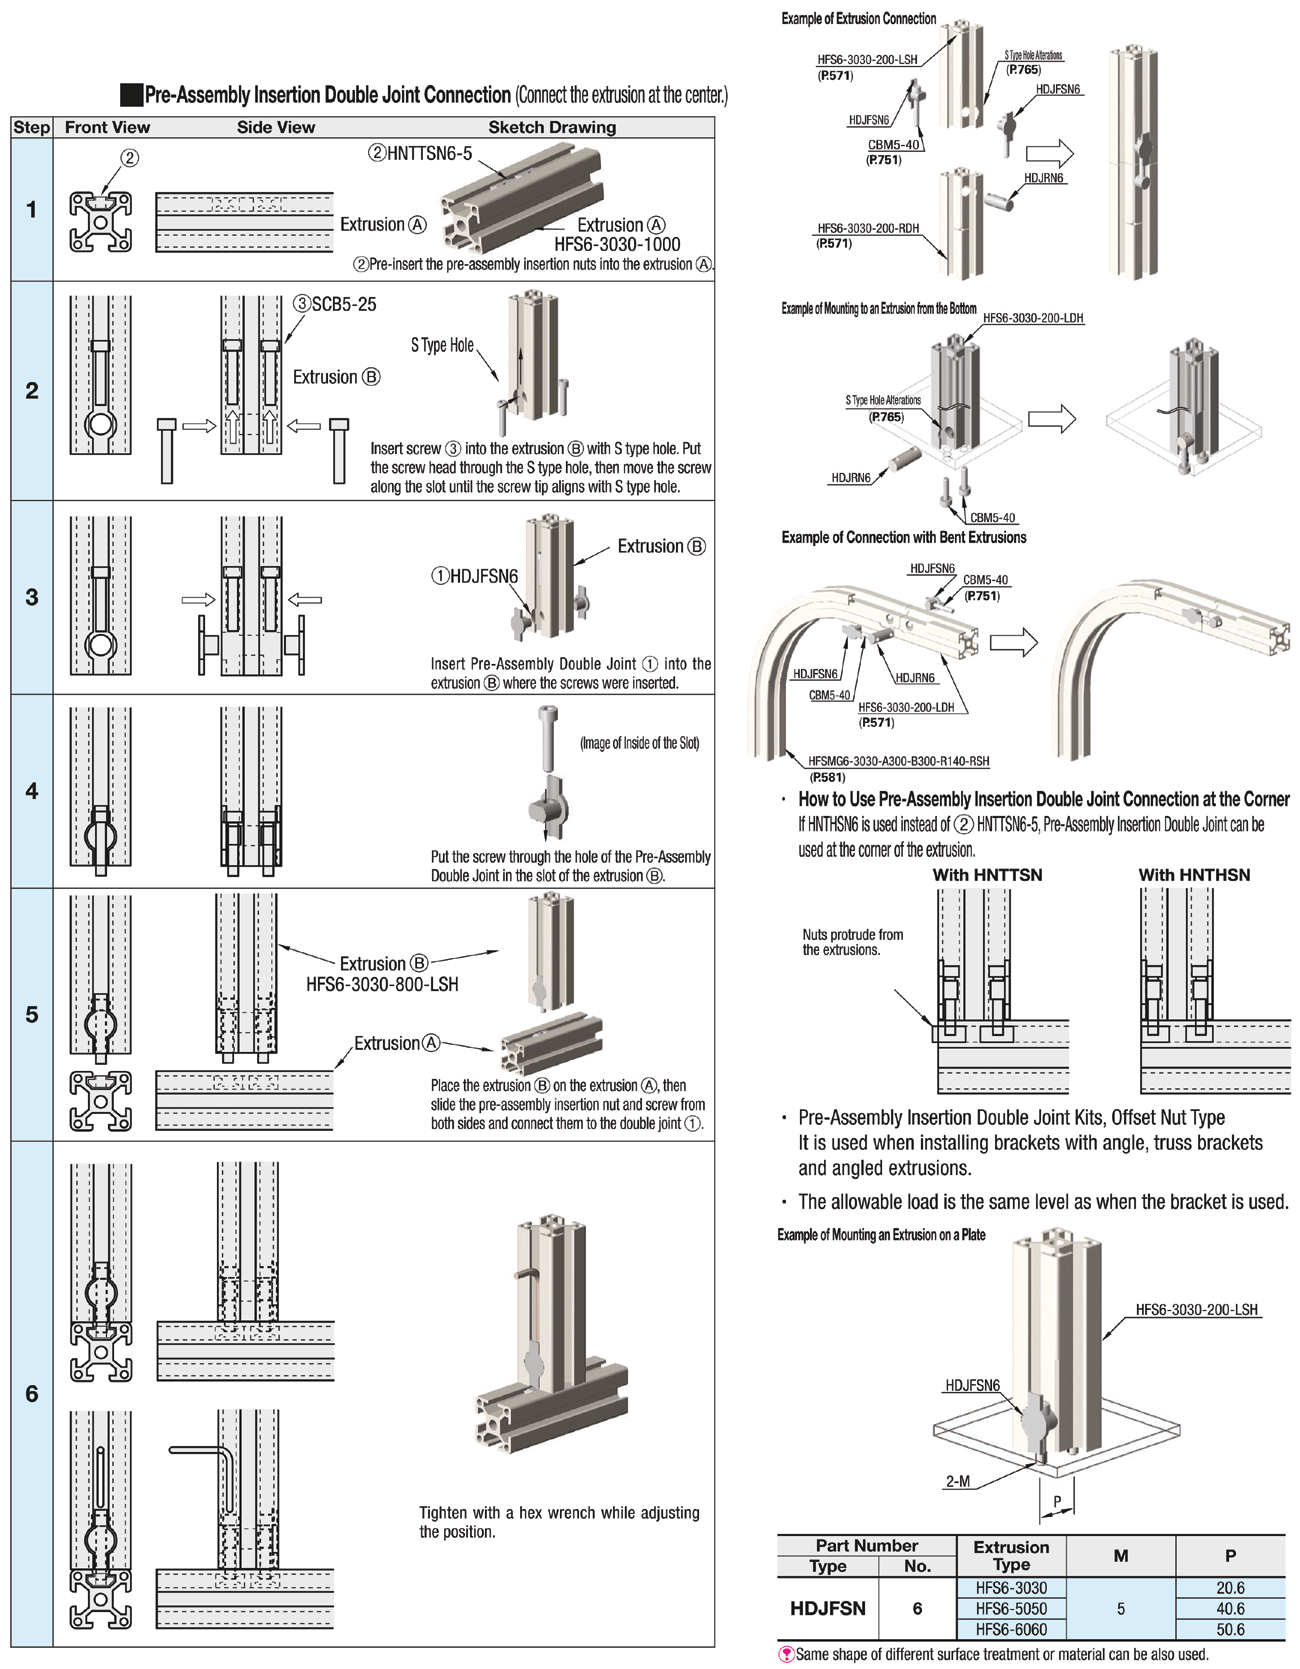 Blind Joint Parts - Nut for Pre-Assembly Double Joint:Related Image